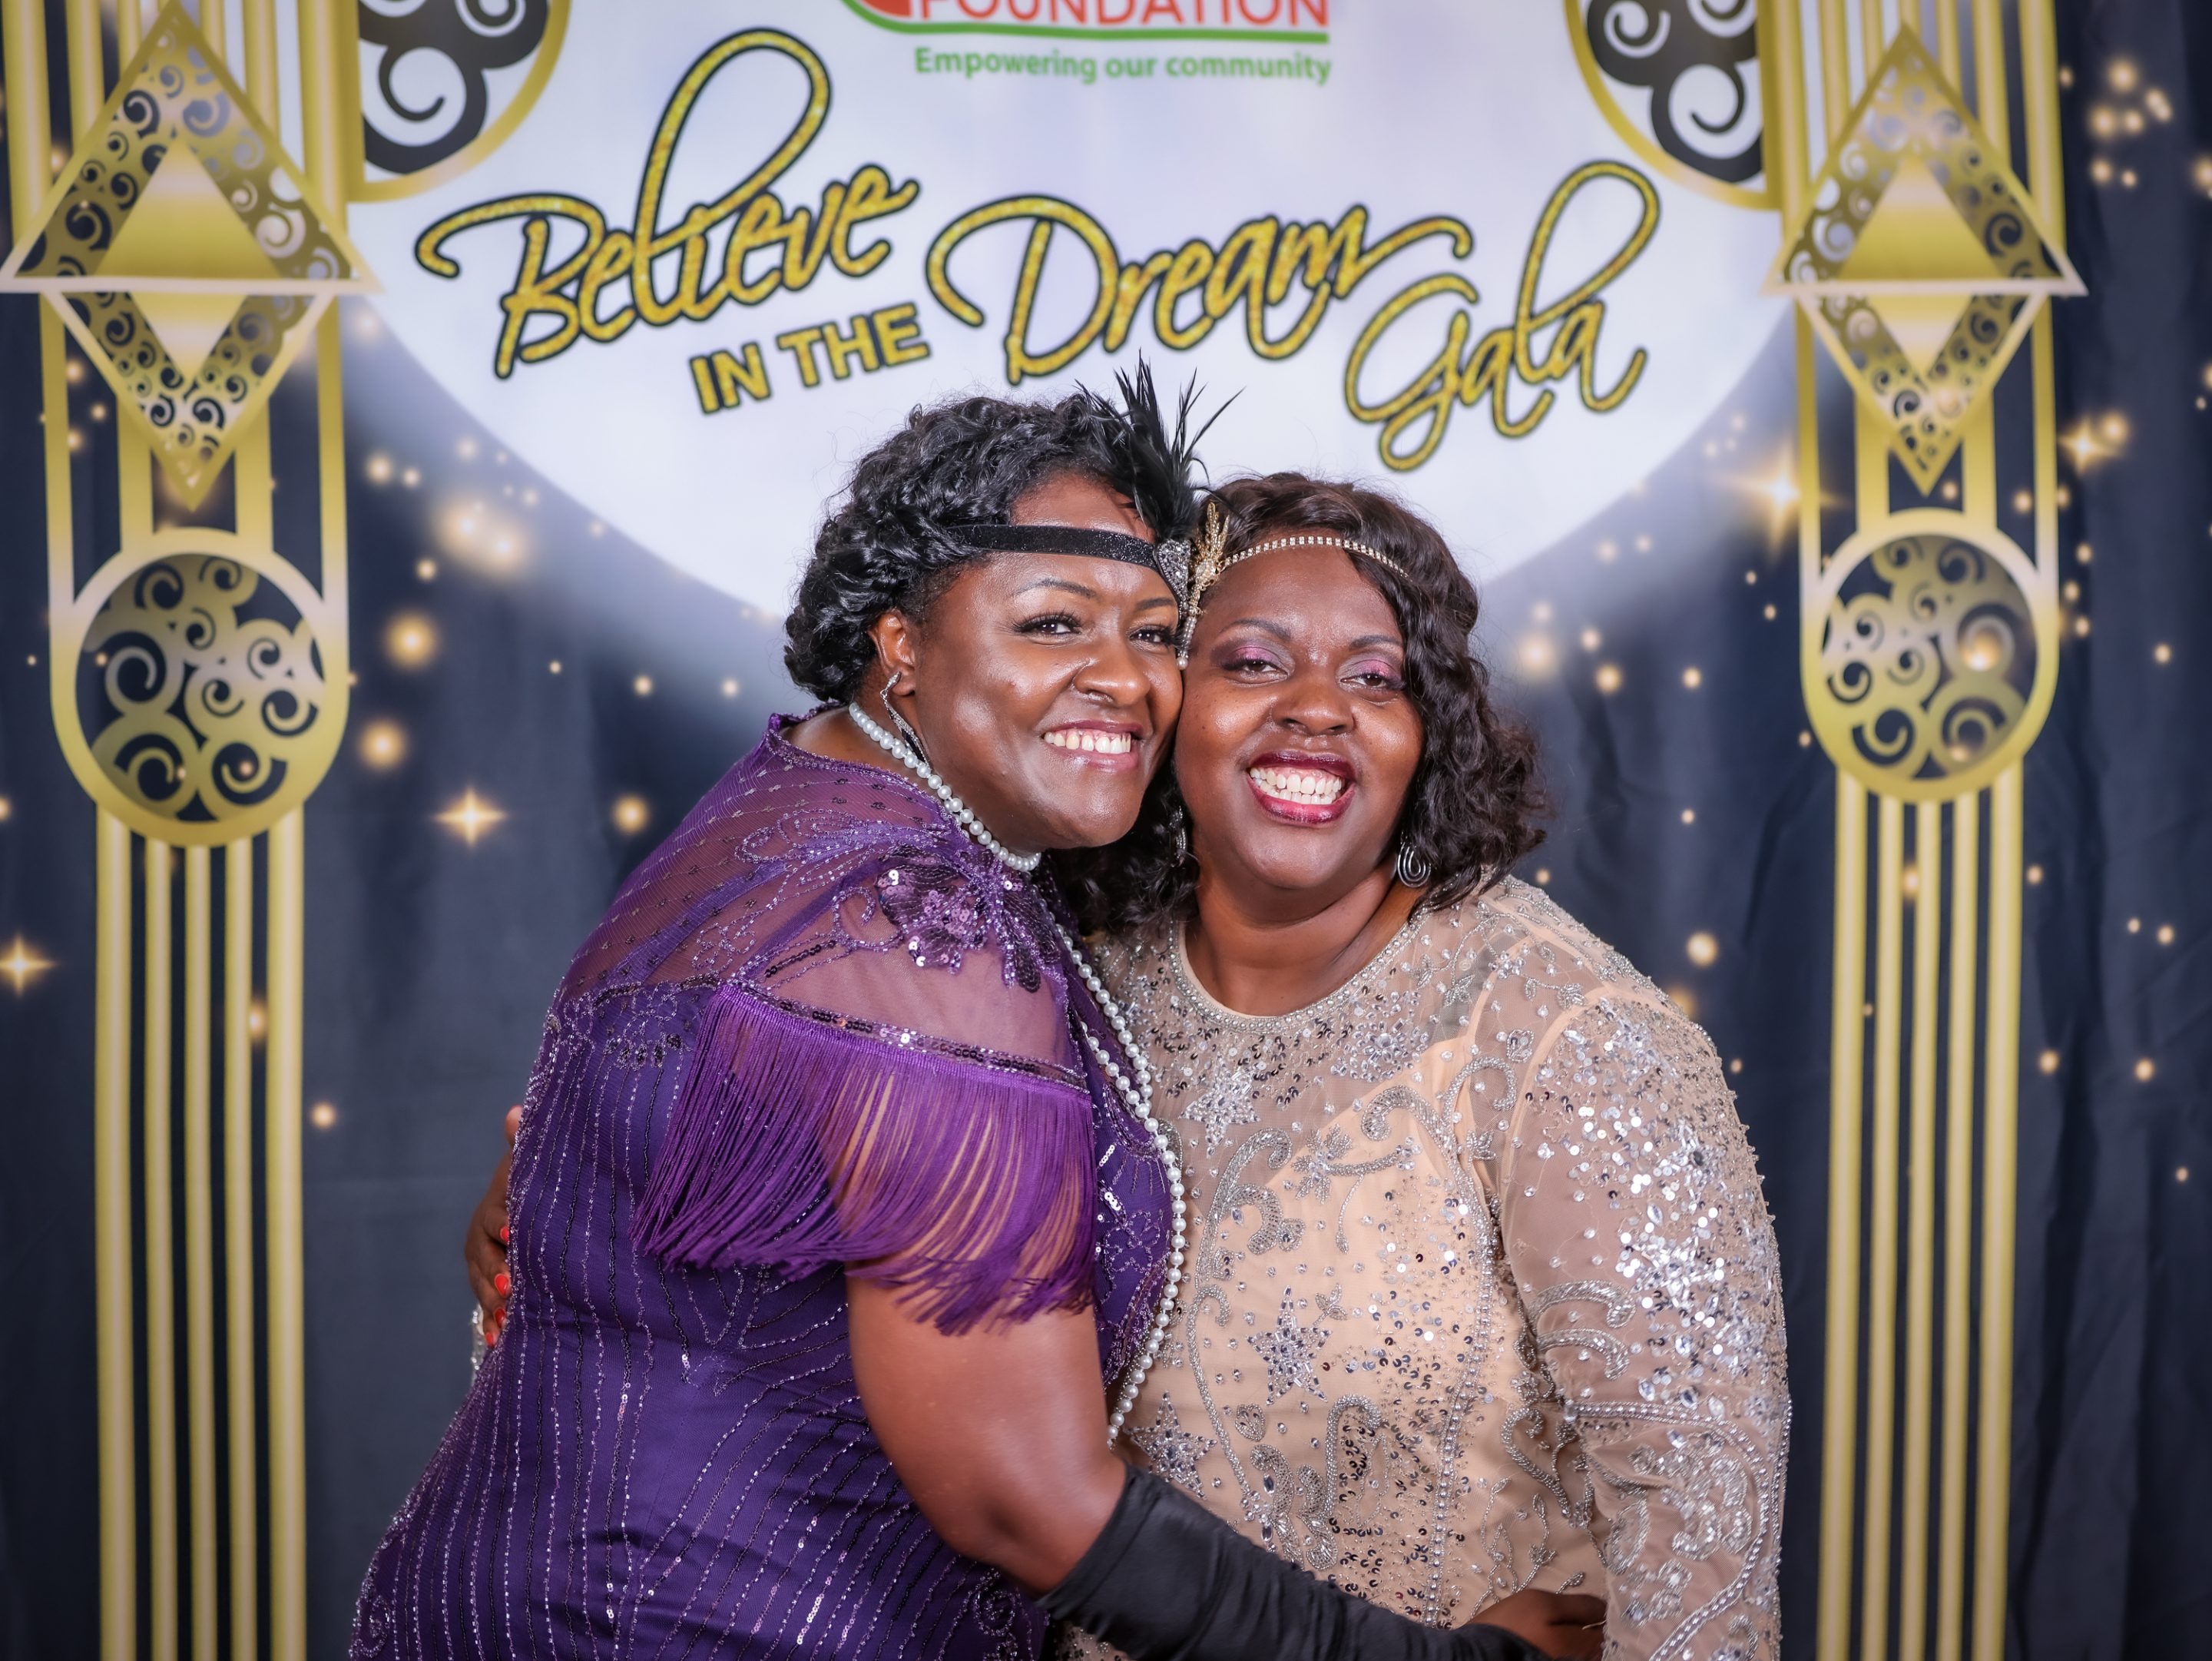 Two women dressed in 1920's attire pose for a photo at a themed party.